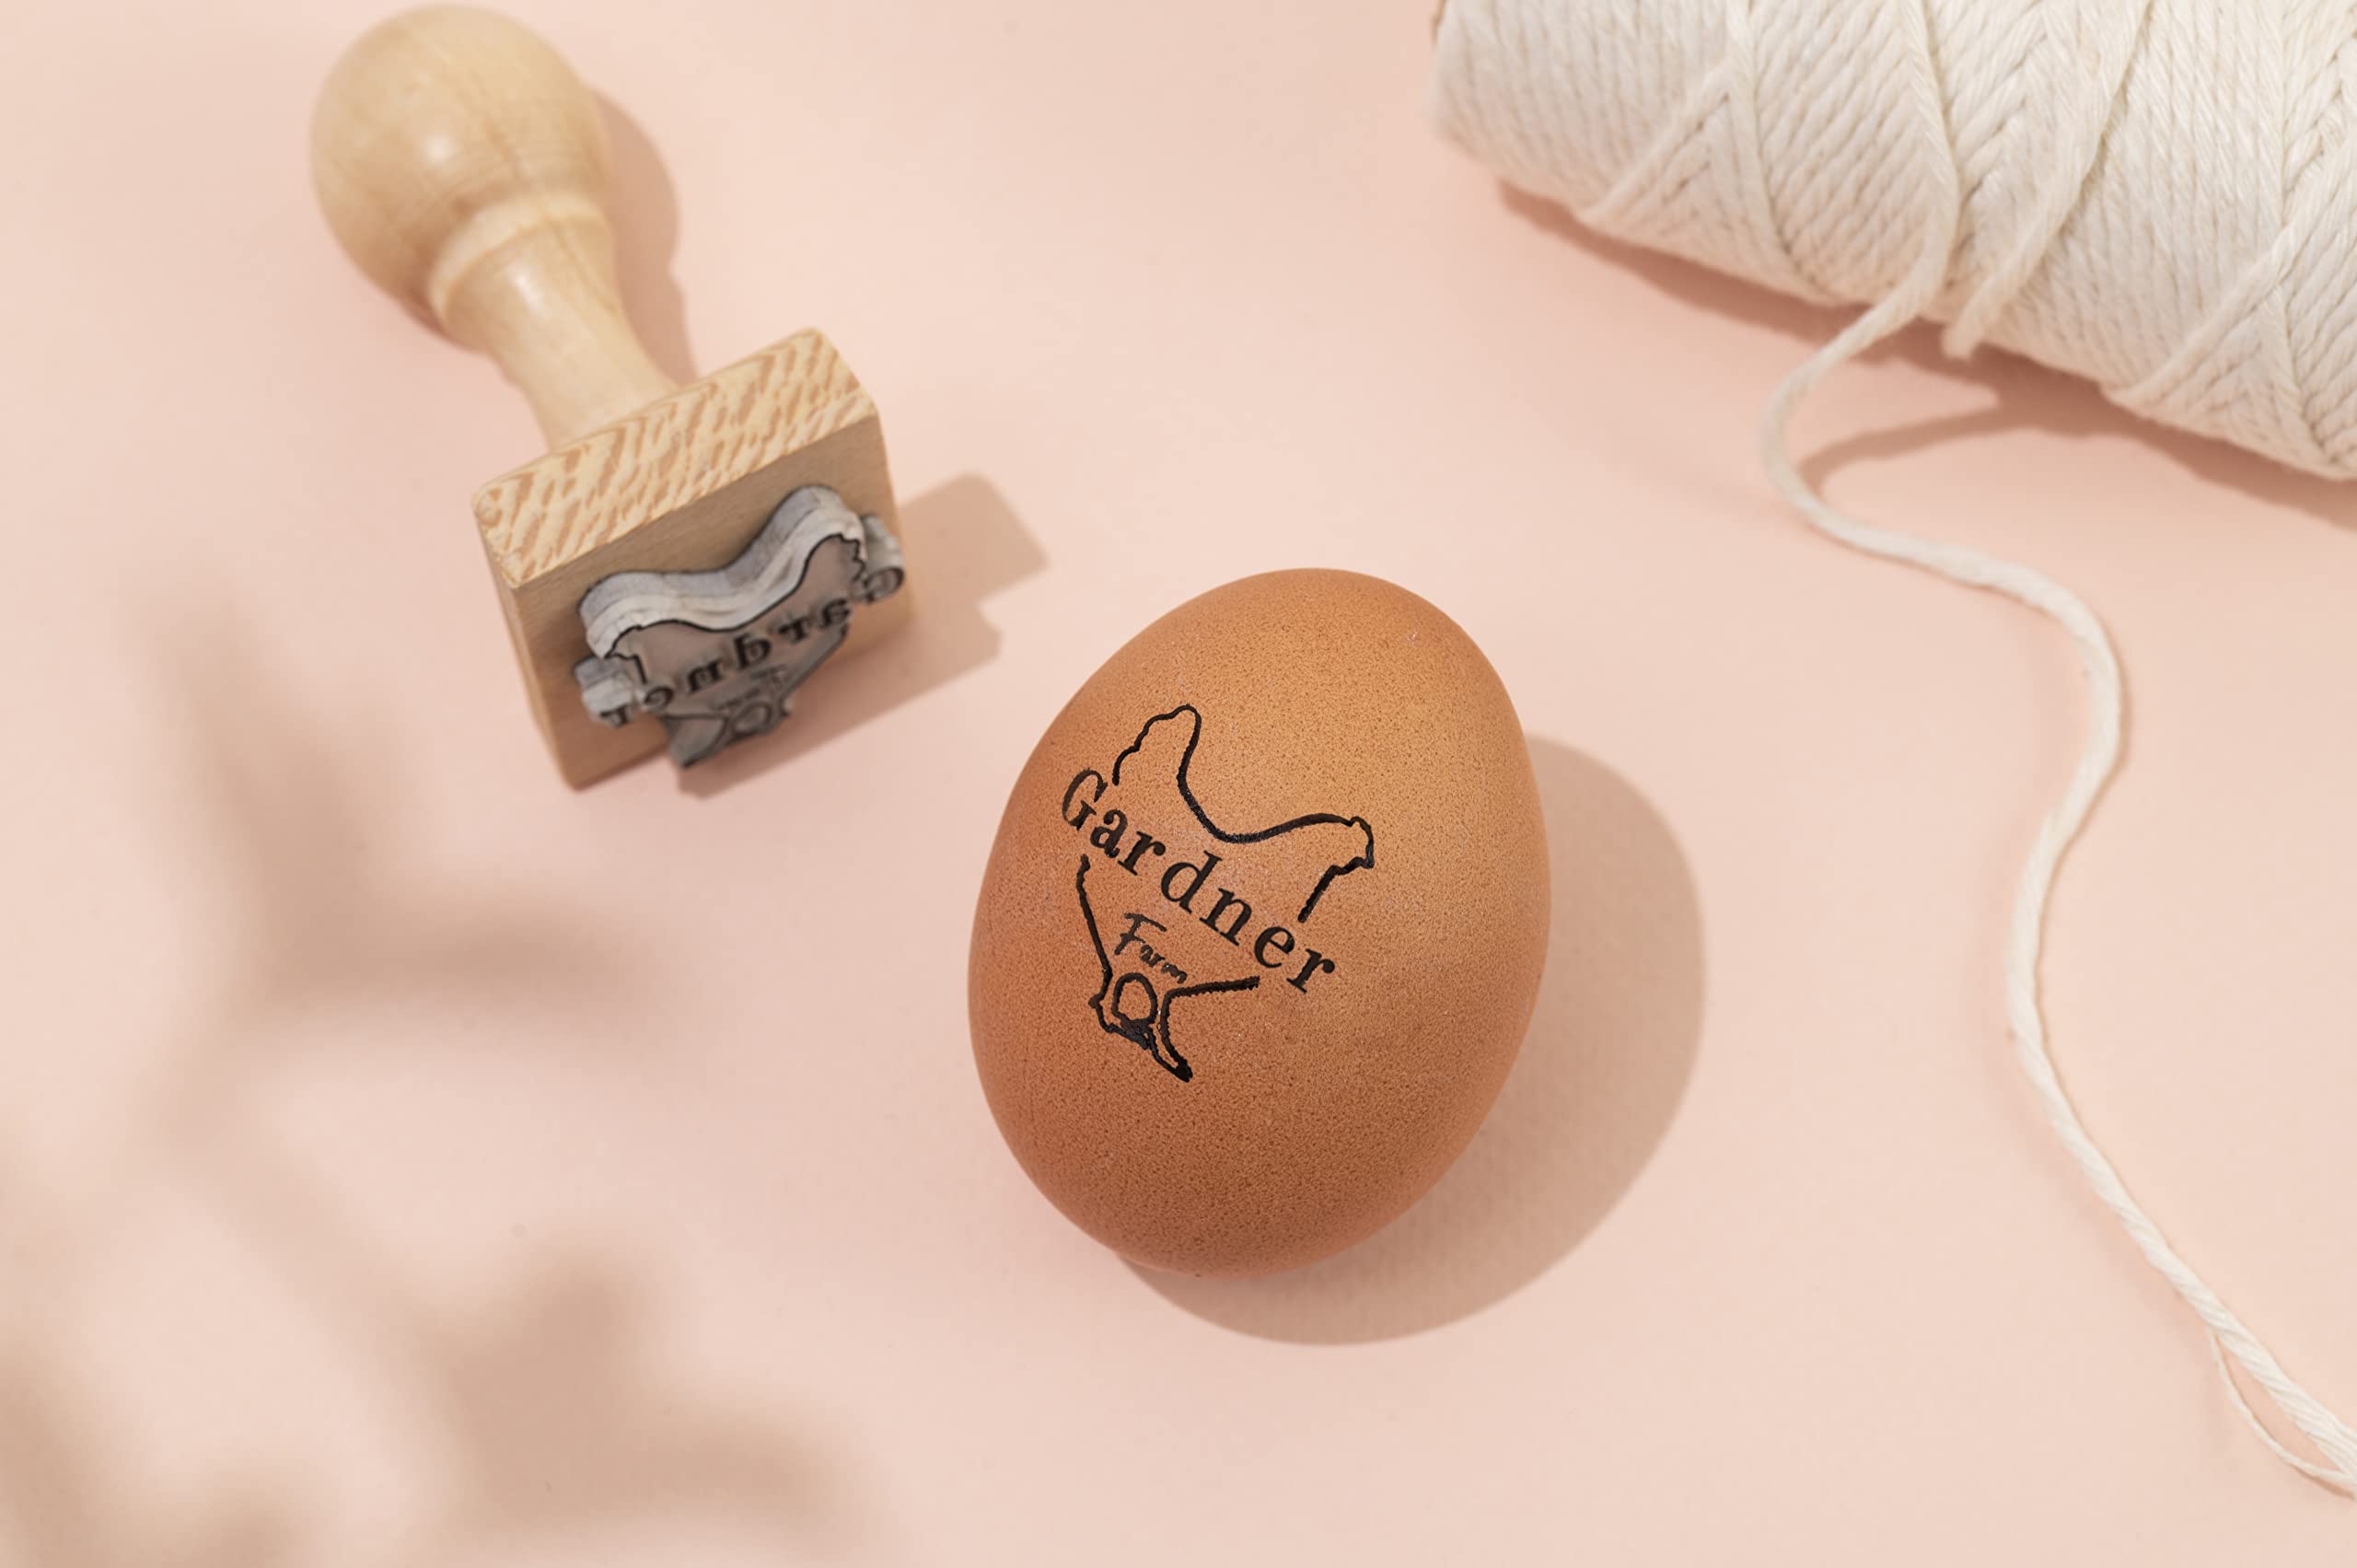 Stamp by Me | Egg Stamp | Chicken Egg Wooden Stamps | Personalized Rubber Stamper for Fresh Eggs | Custom Stamping | Egg Labels | Farm Stamp | Self Inking | Black Ink | Unique Designs| Mini Logo Stamp